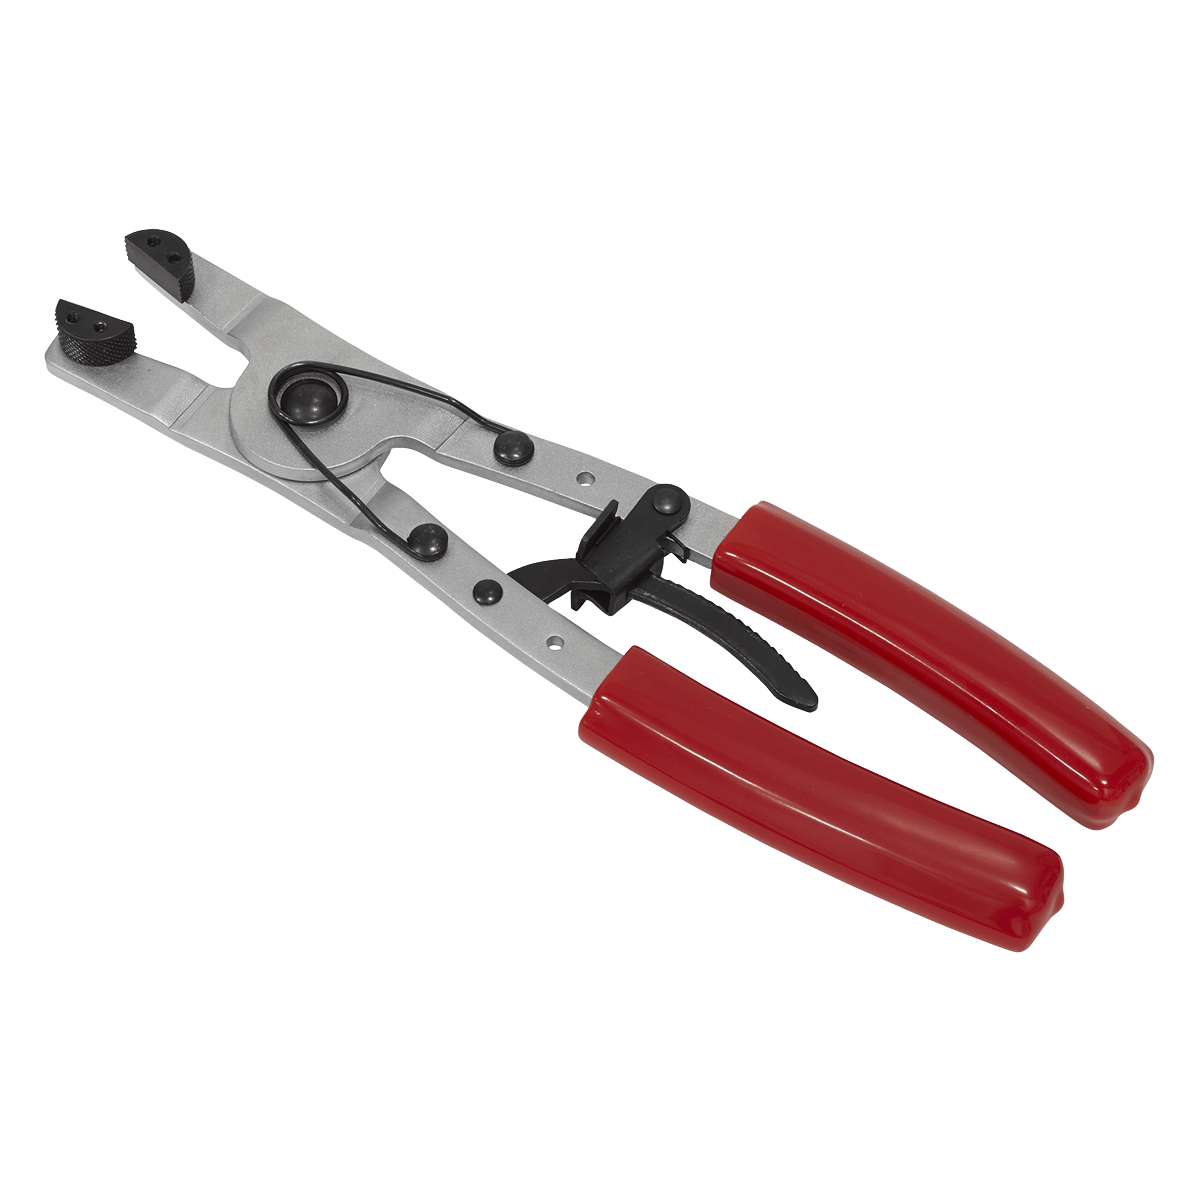 Ratchet Pliers Motorcycle Brake Piston Removal - Newmarket Motorcycle Company 